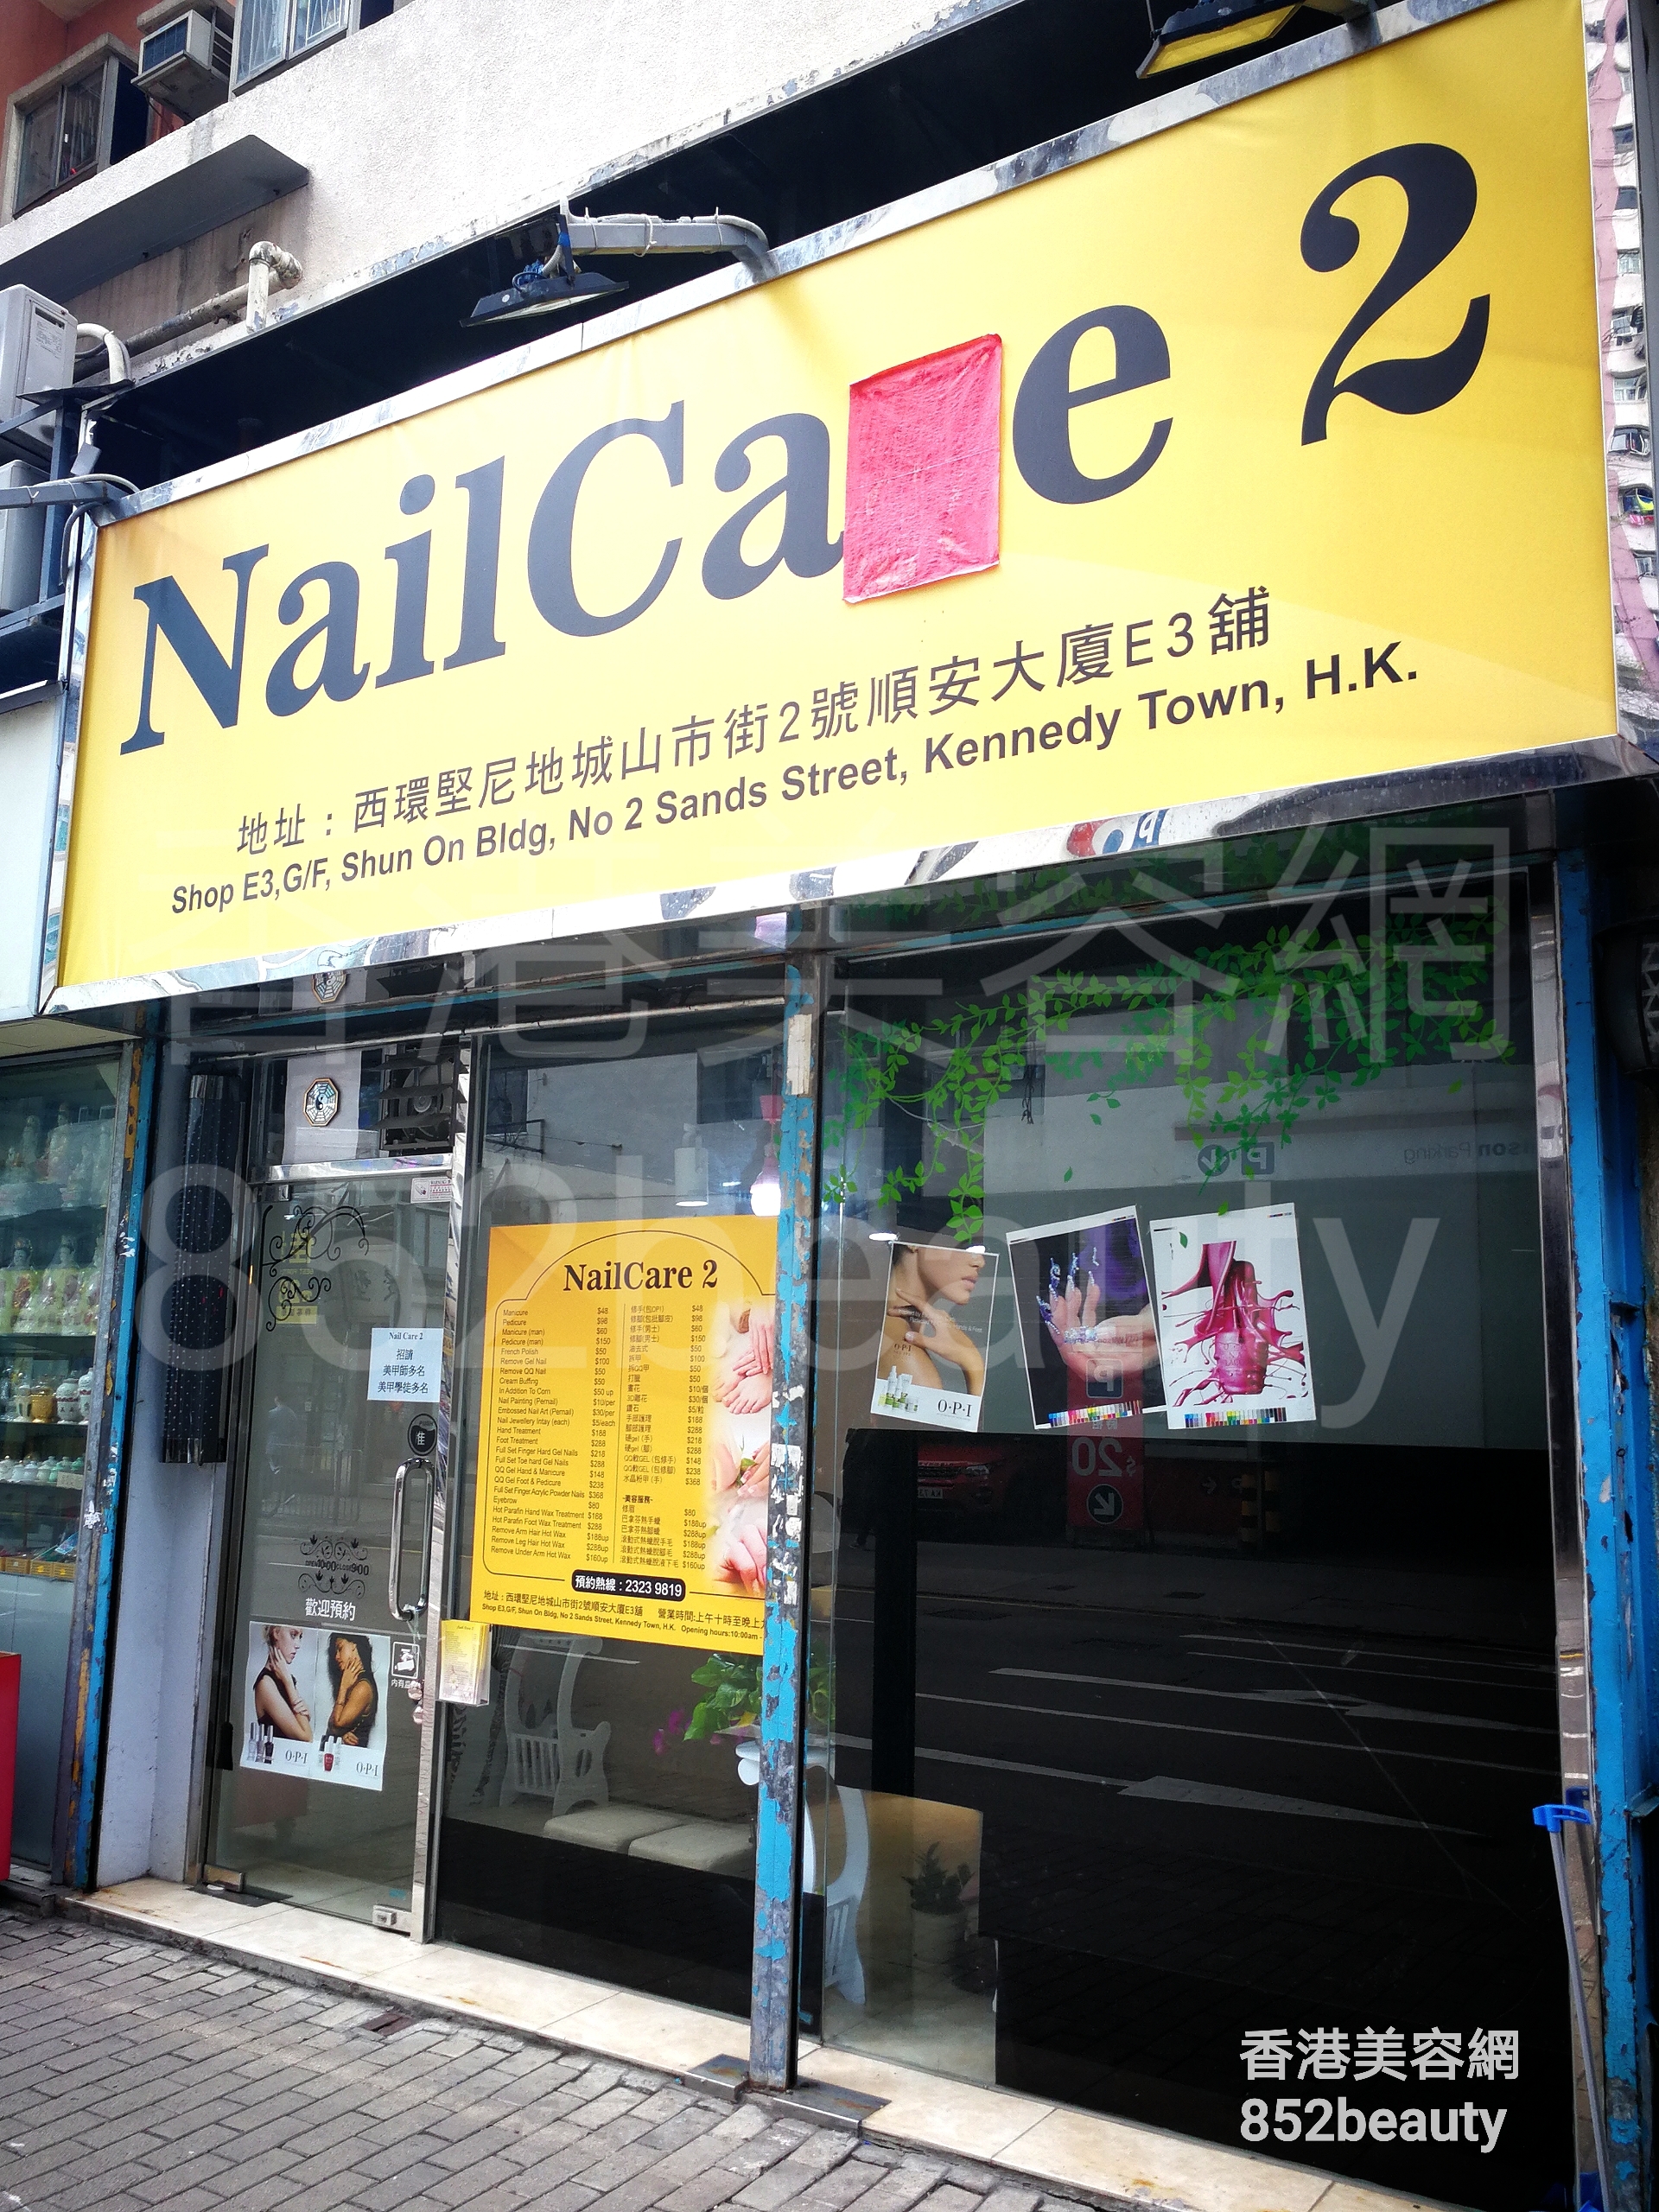 Hair Removal: NailCare 2